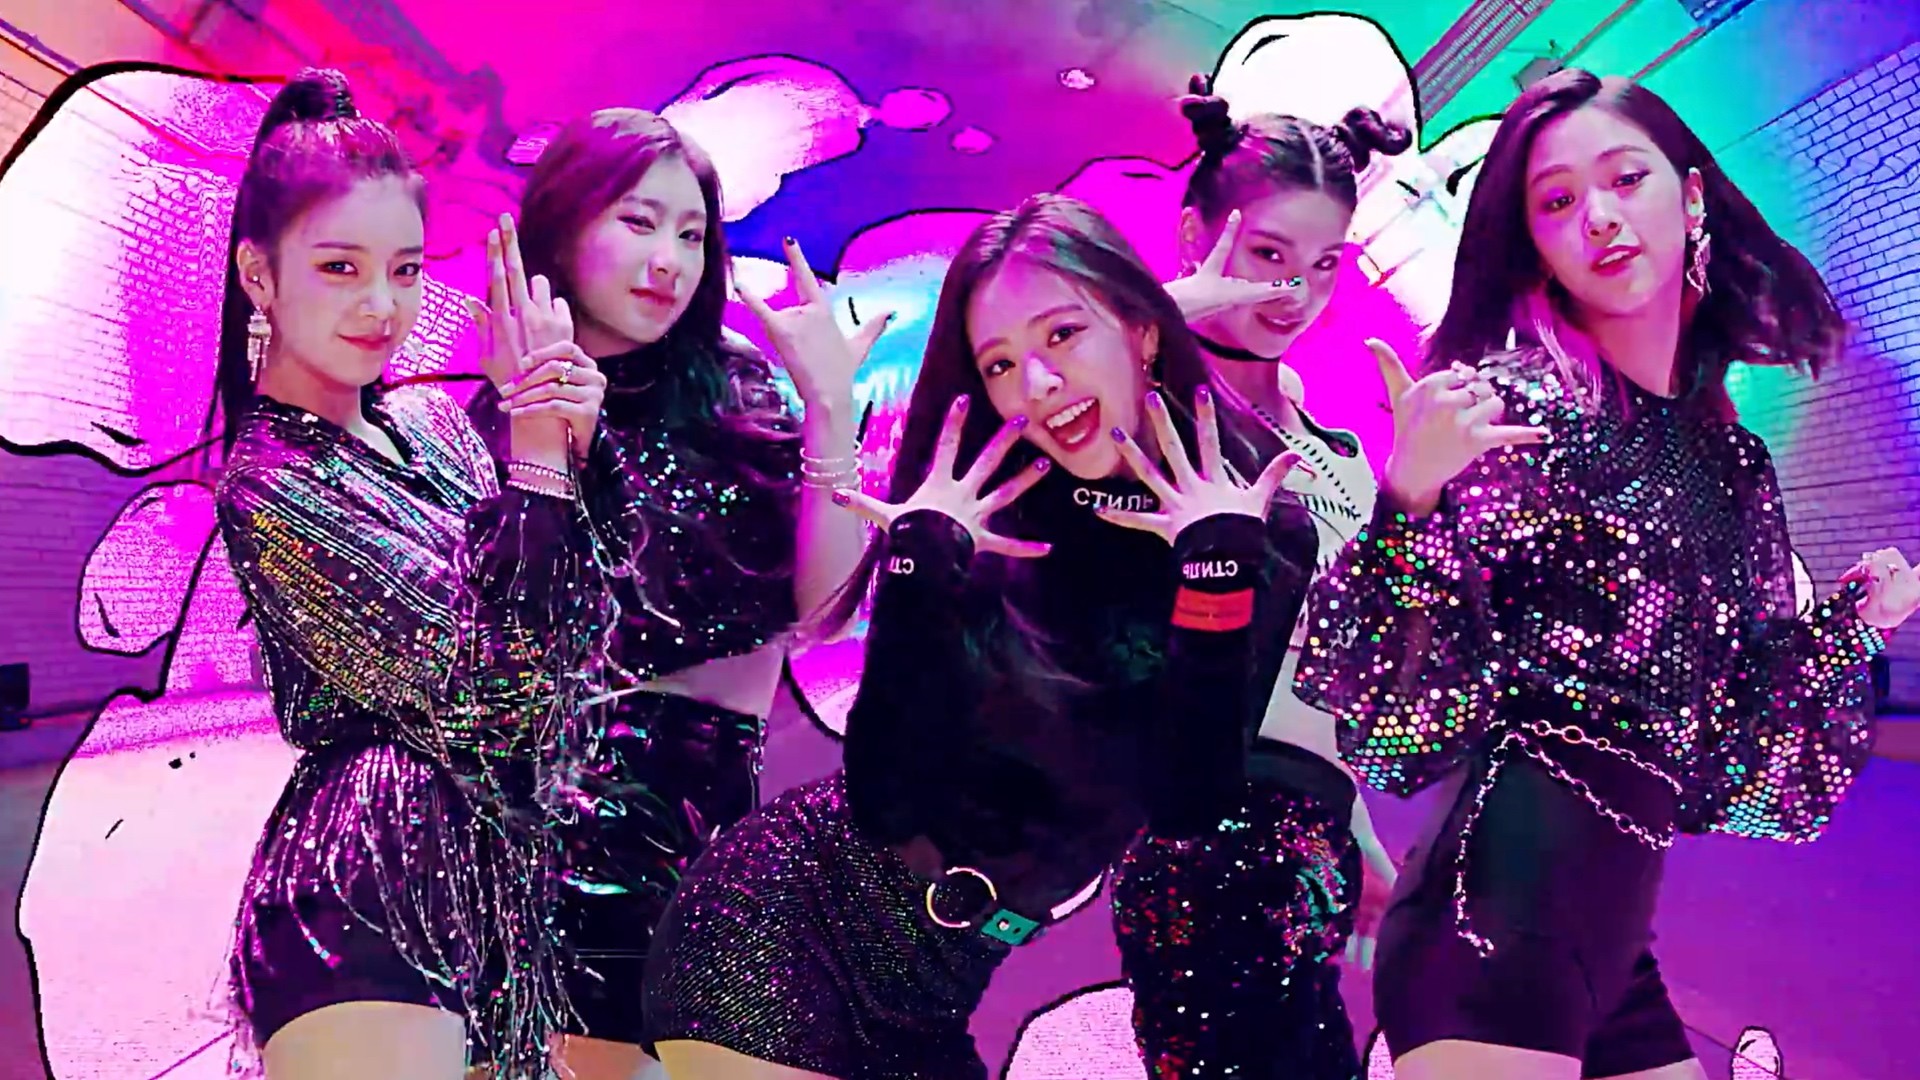 Itzy are on their way to bigger things in K-pop.